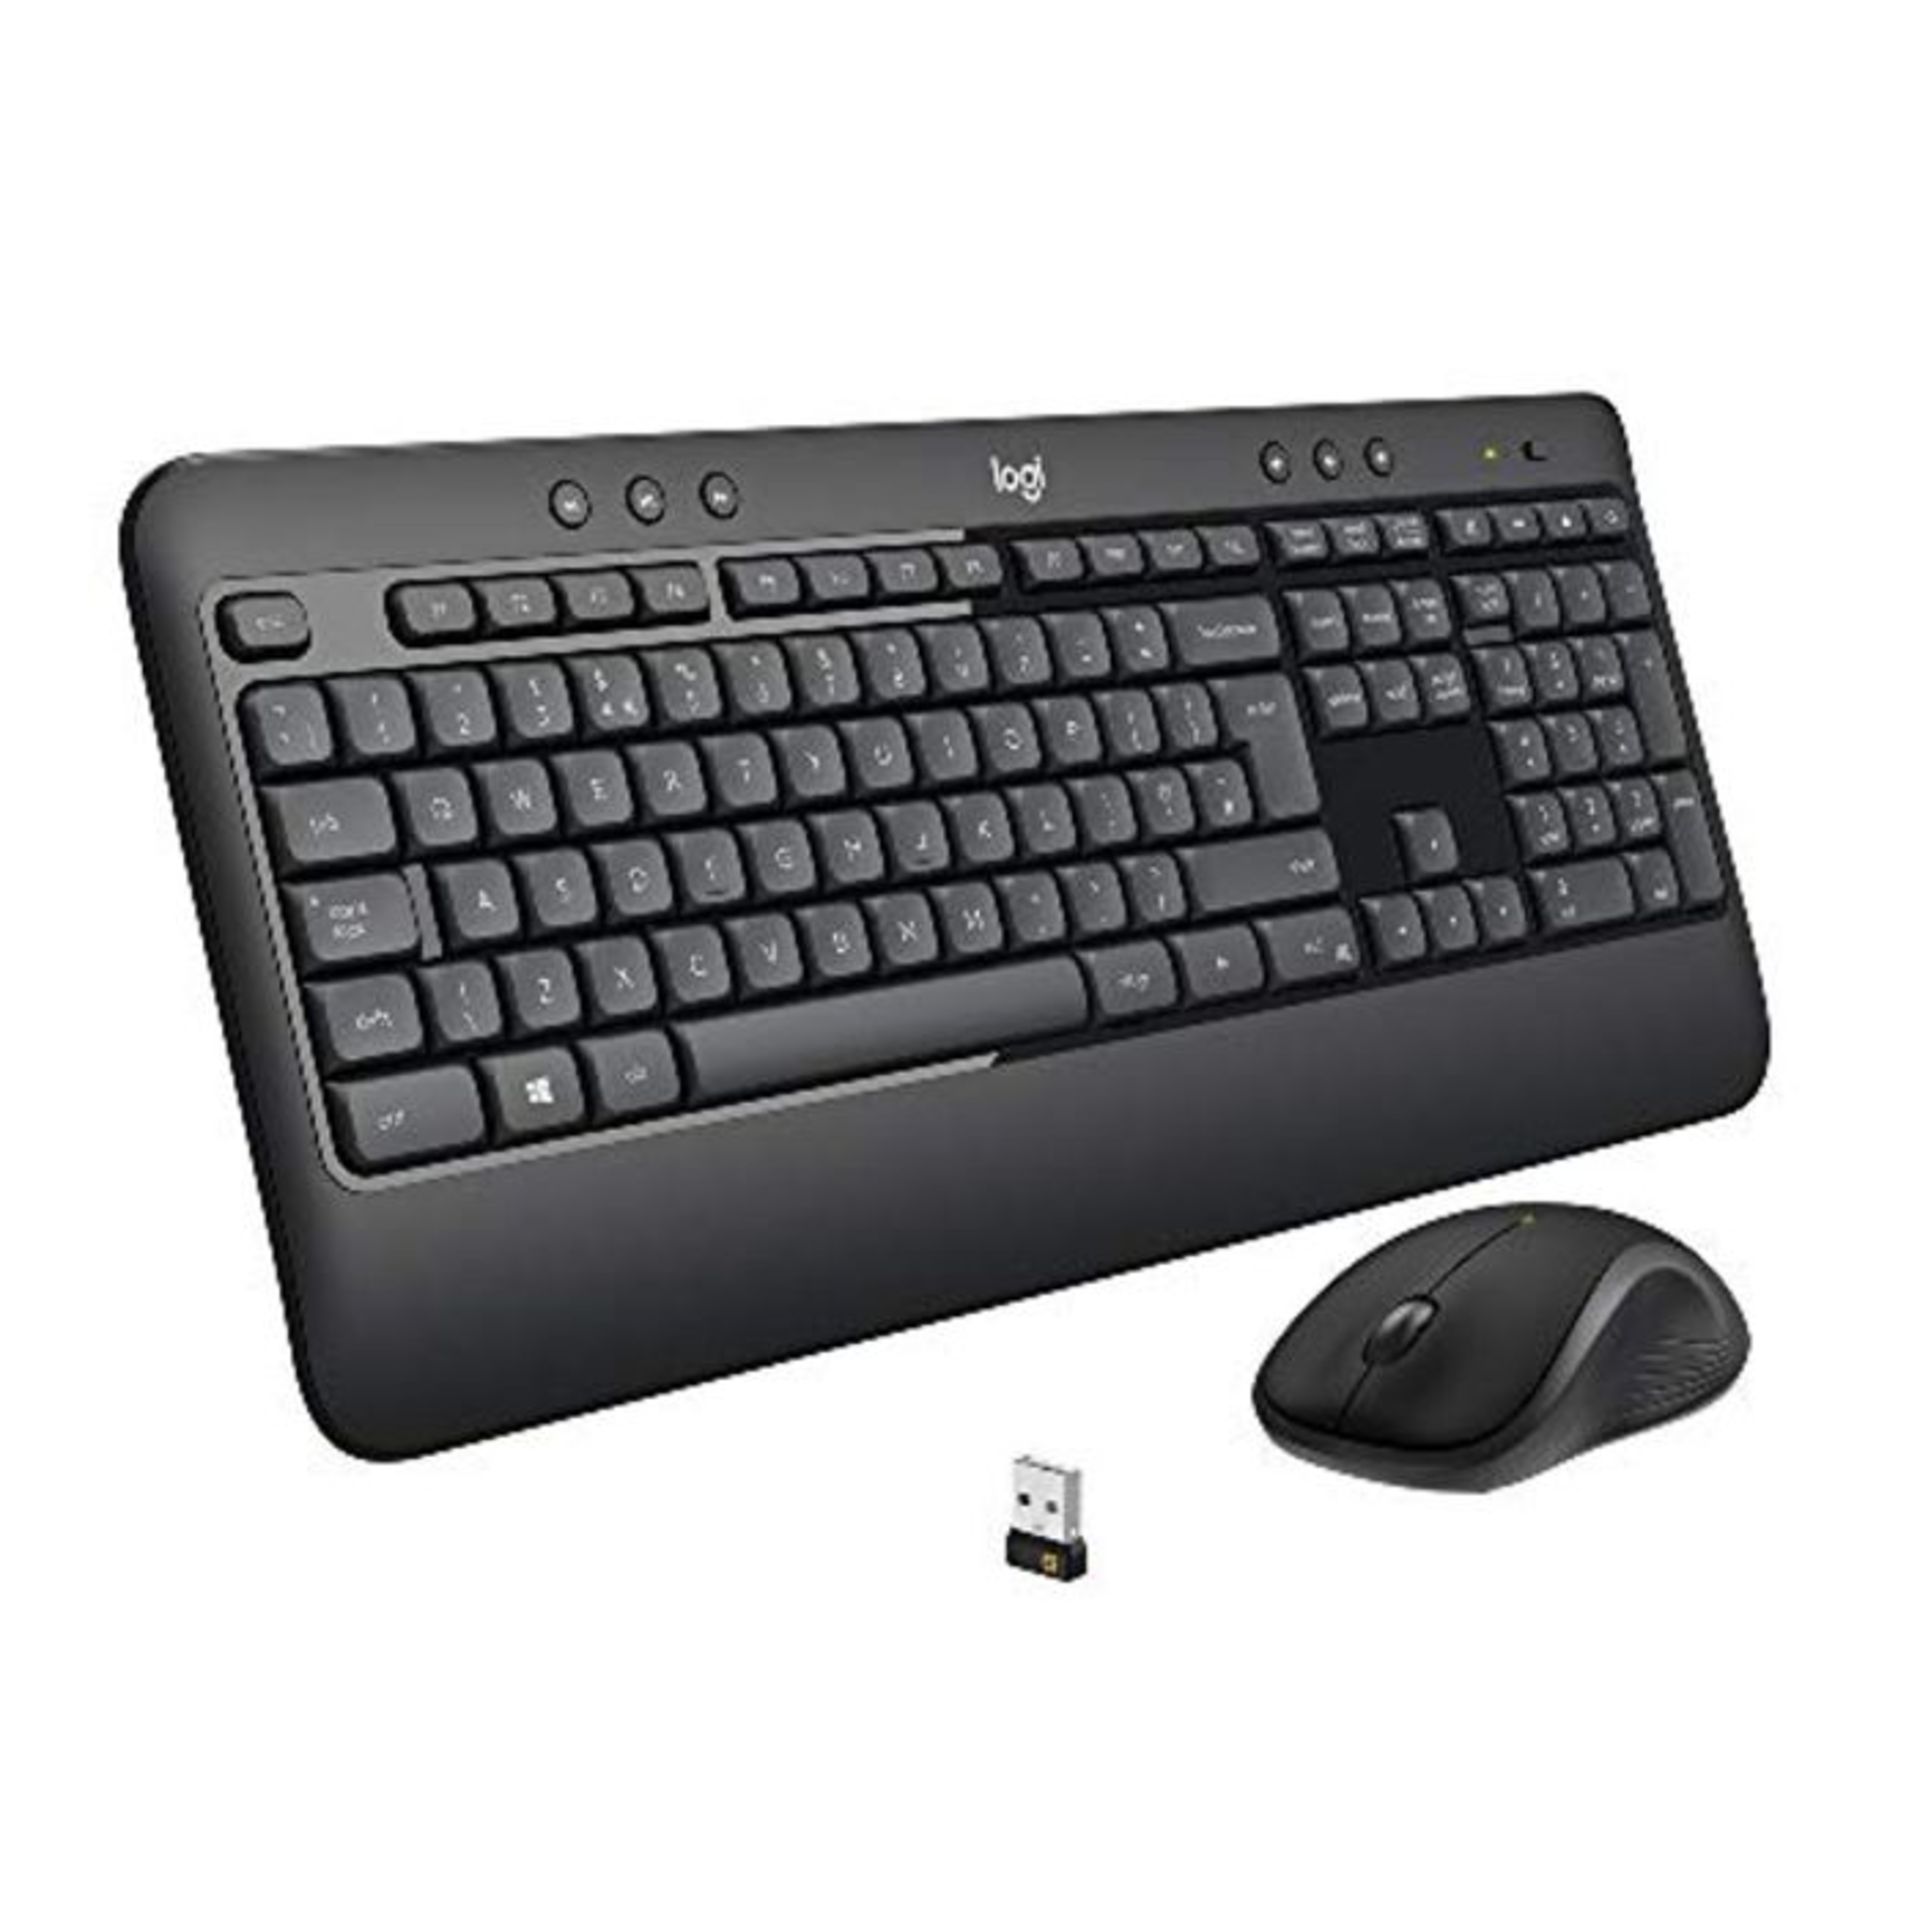 Logitech MK540 Wireless Keyboard and Mouse Combo for Windows, 2.4 GHz Wireless with Un